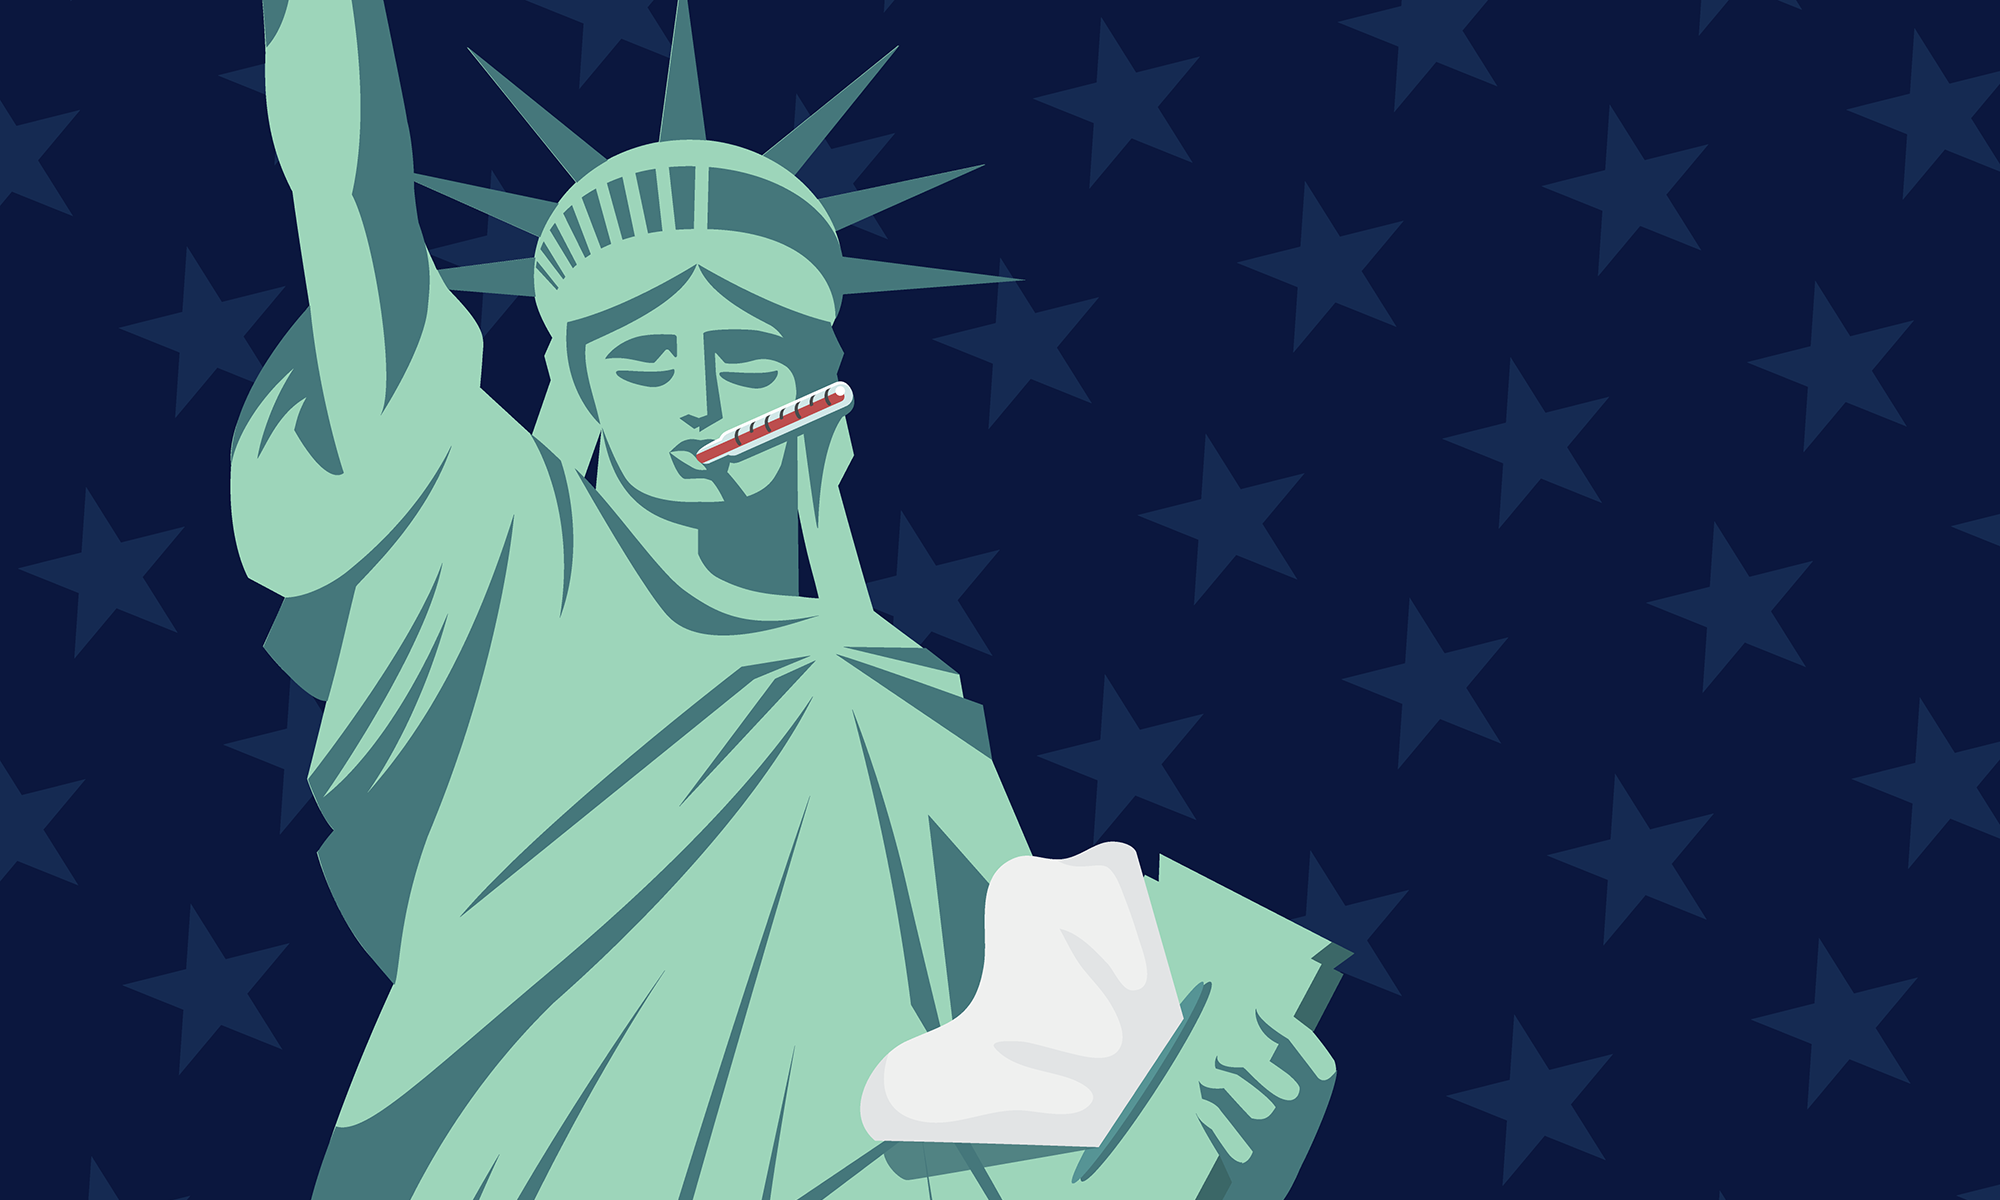 Vector illustration of Lady Liberty with a thermometer in her mouth to show taking the temperature on American democracy.